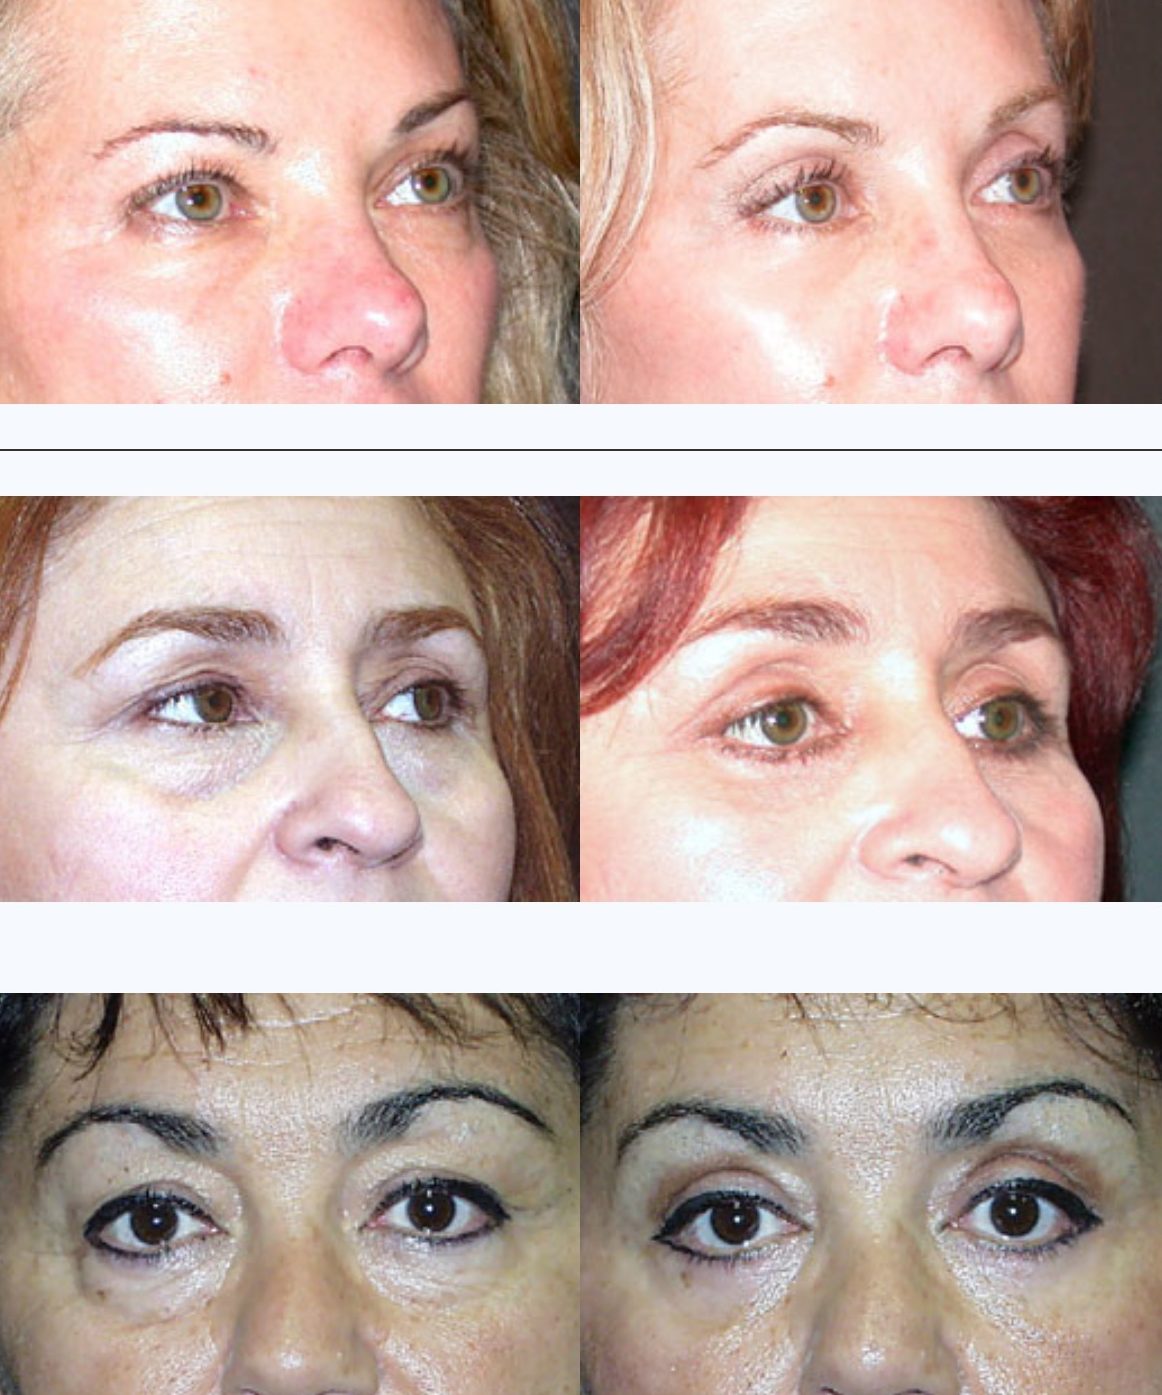 Ophthalmic Plastic and Facial Aesthetic Surgery Services